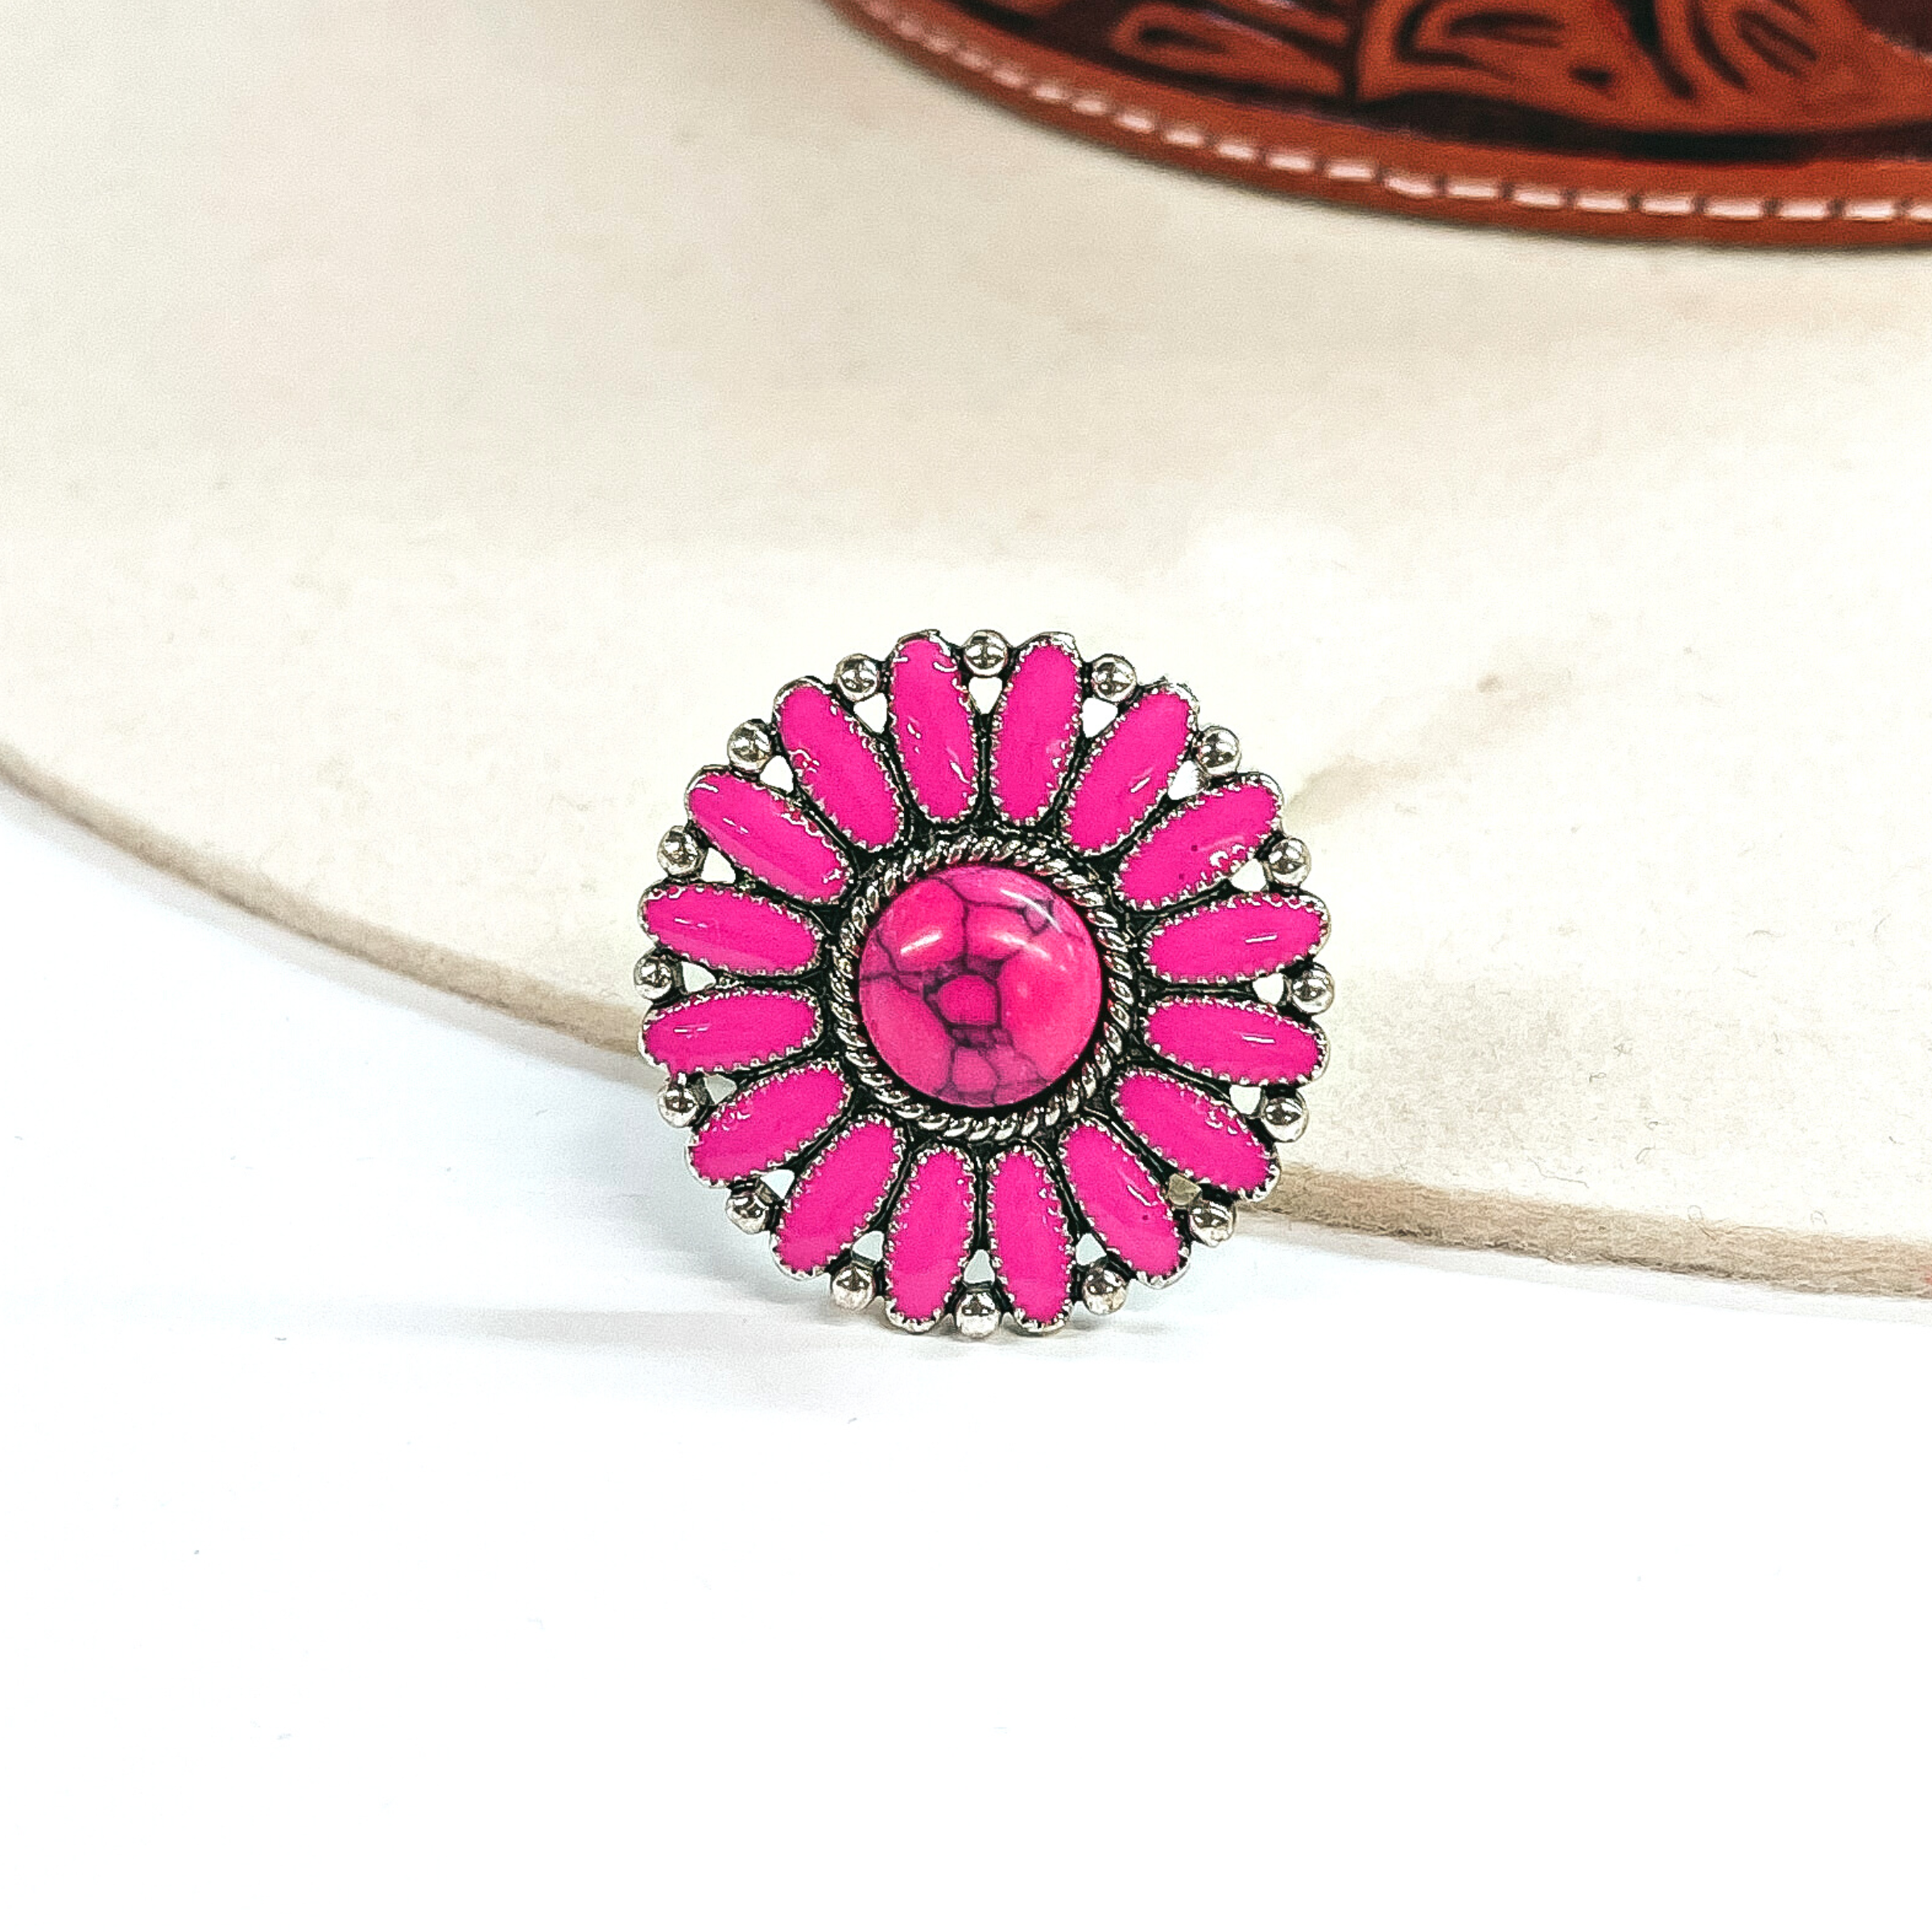 This is a pink,circle concho, epoxy cluster ring in a silver setting.  The ring has a small circle stone in the center with a silver, rope textured outline,  with oval shaped stone all around like a flower. In between each 'petal' it has silver  circles all around. This ring is taken on an ivory felt hat  with a brown textured band and on a white background.